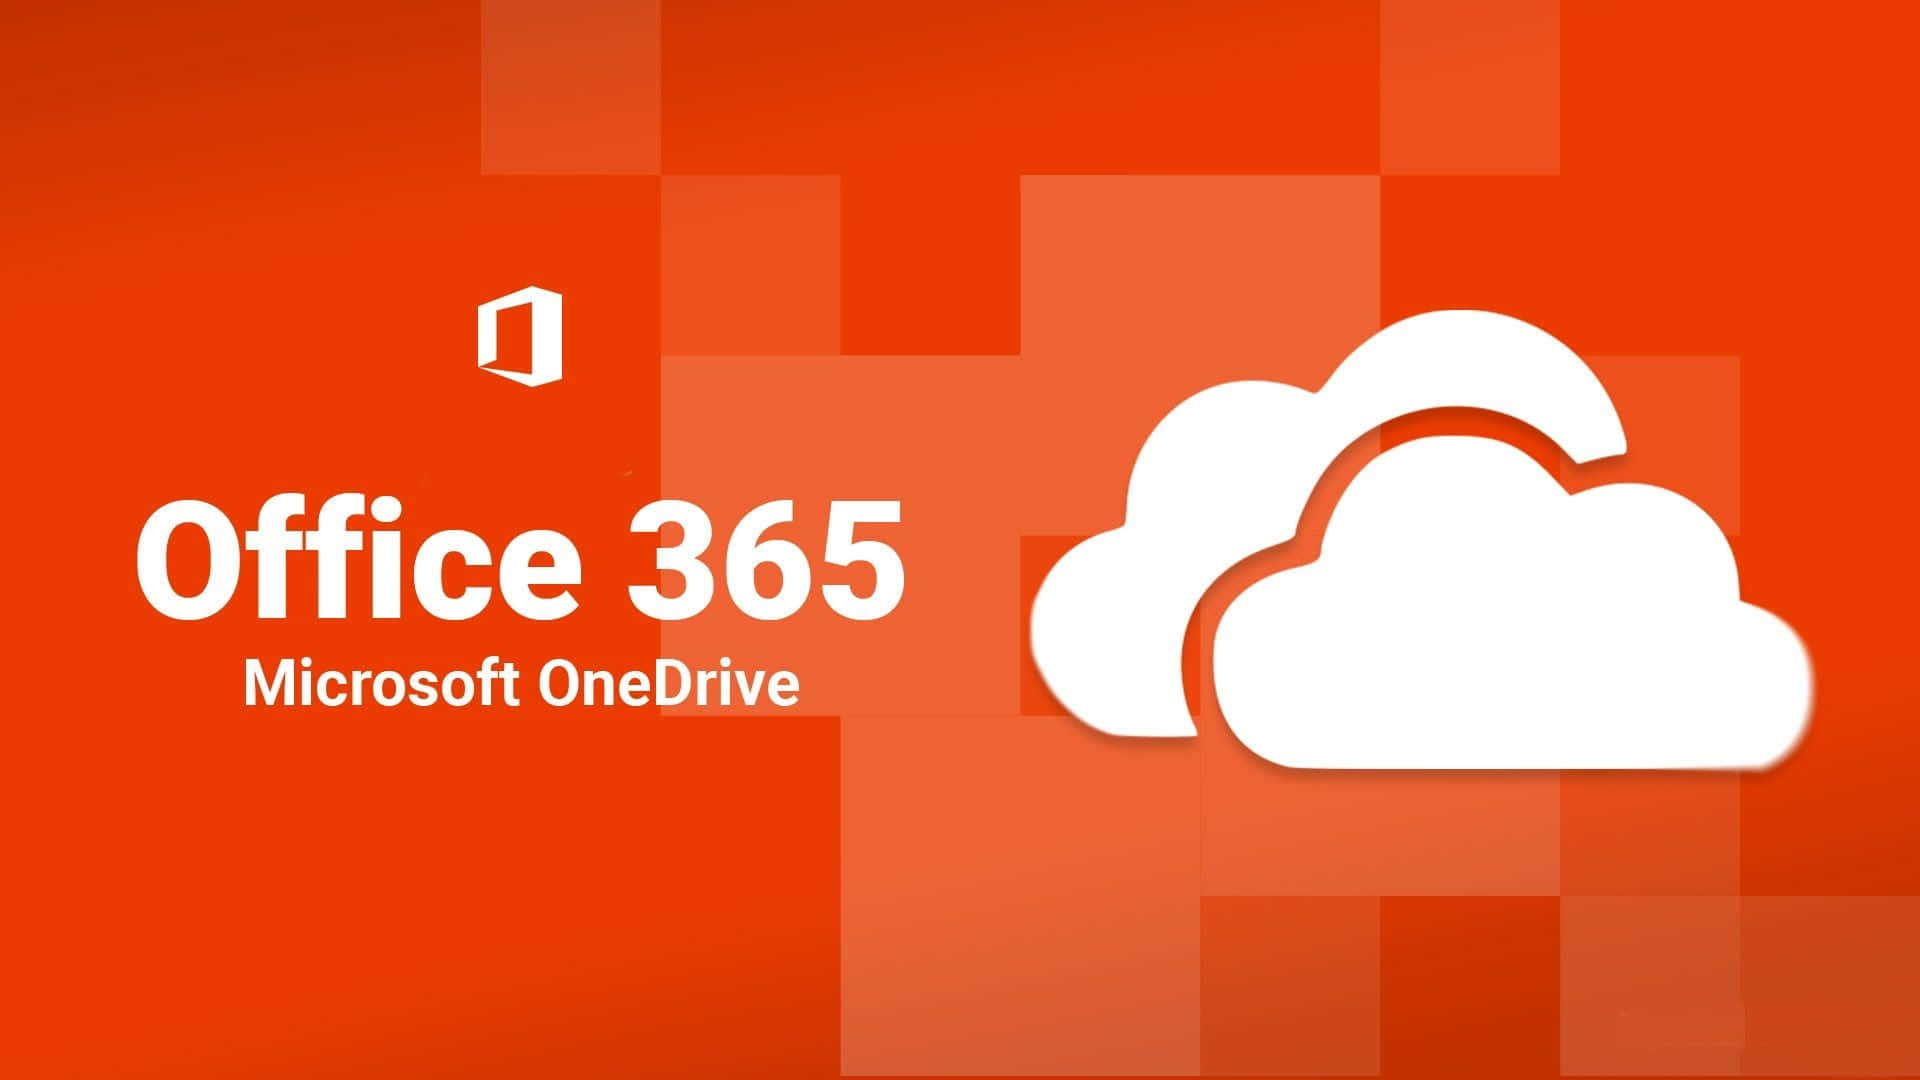 Discover the world of Office 365